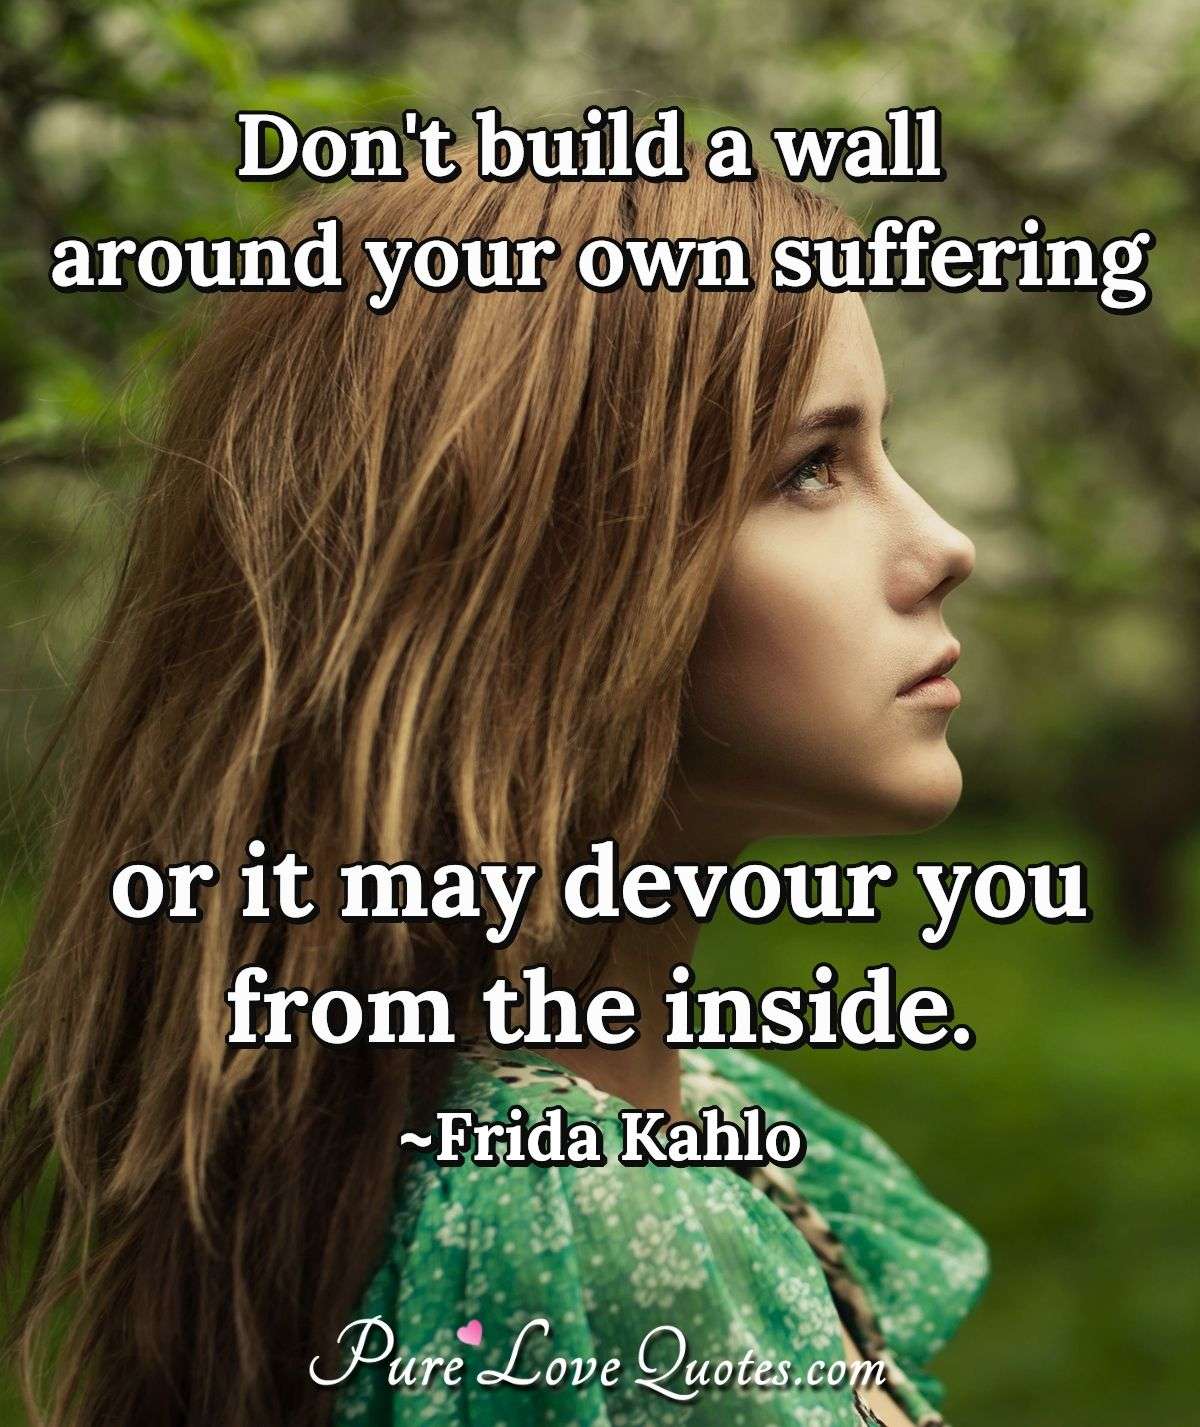 Don't build a wall around your own suffering or it may devour you from the inside. - Frida Kahlo